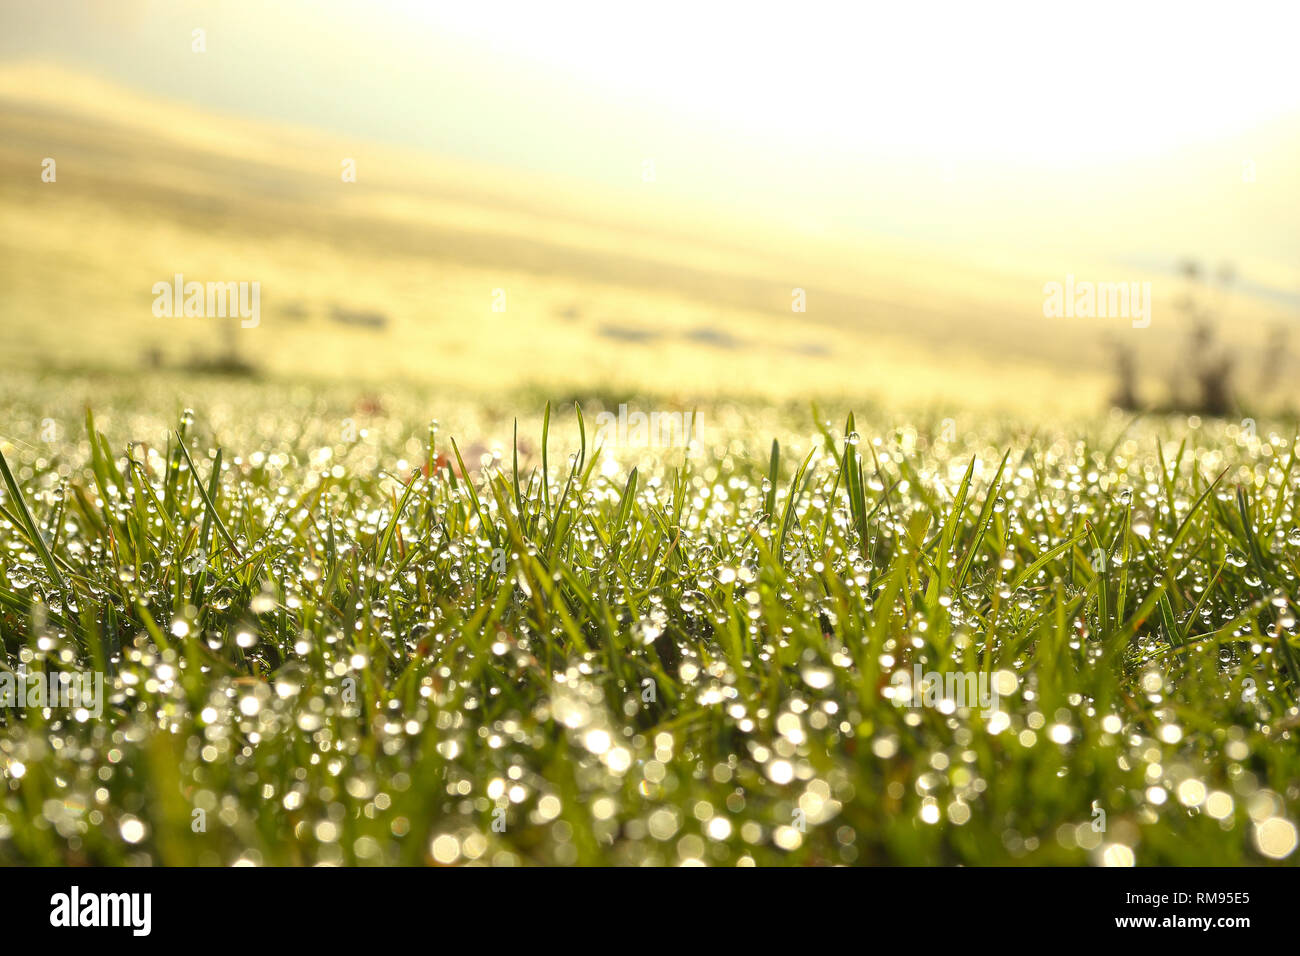 Drops of water dew on grass in daylight with nice blur effect in out of focus zone Stock Photo